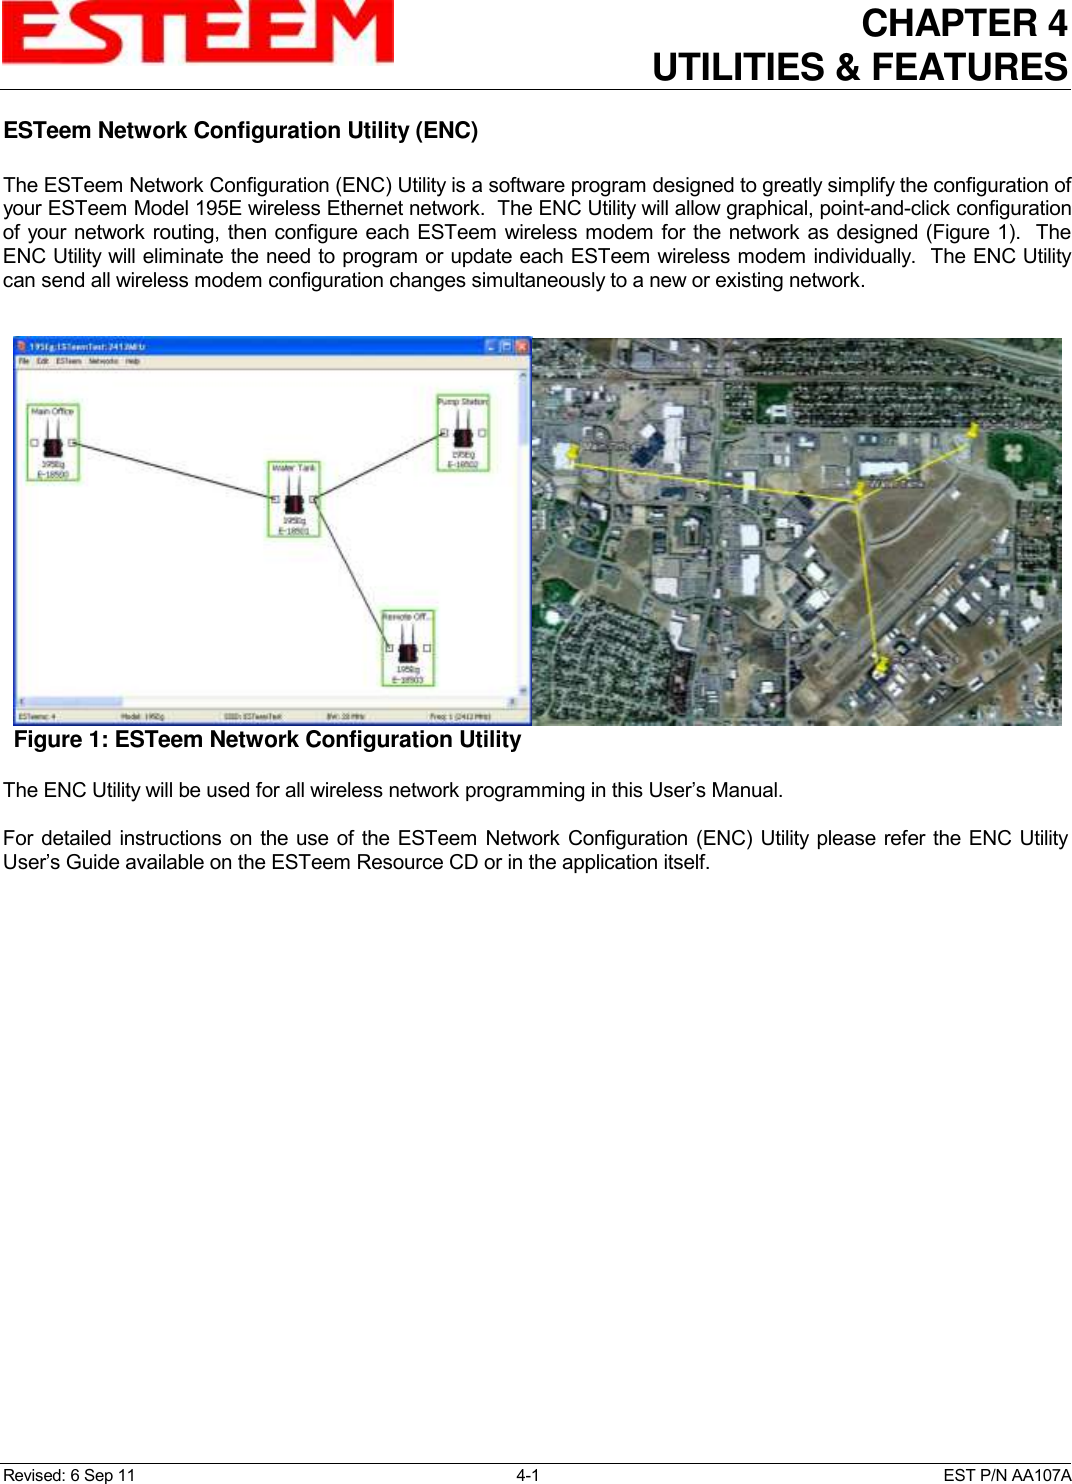 CHAPTER 4   UTILITIES &amp; FEATURES  Revised: 6 Sep 11  4-1  EST P/N AA107A ESTeem Network Configuration Utility (ENC)  The ESTeem Network Configuration (ENC) Utility is a software program designed to greatly simplify the configuration of your ESTeem Model 195E wireless Ethernet network.  The ENC Utility will allow graphical, point-and-click configuration of your network routing, then configure each ESTeem wireless modem for the network as designed (Figure 1).  The ENC Utility will eliminate the need to program or update each ESTeem wireless modem individually.  The ENC Utility can send all wireless modem configuration changes simultaneously to a new or existing network.    The ENC Utility will be used for all wireless network programming in this User’s Manual.    For detailed instructions on  the  use of the ESTeem Network Configuration (ENC) Utility  please refer the ENC Utility User’s Guide available on the ESTeem Resource CD or in the application itself.  Figure 1: ESTeem Network Configuration Utility 